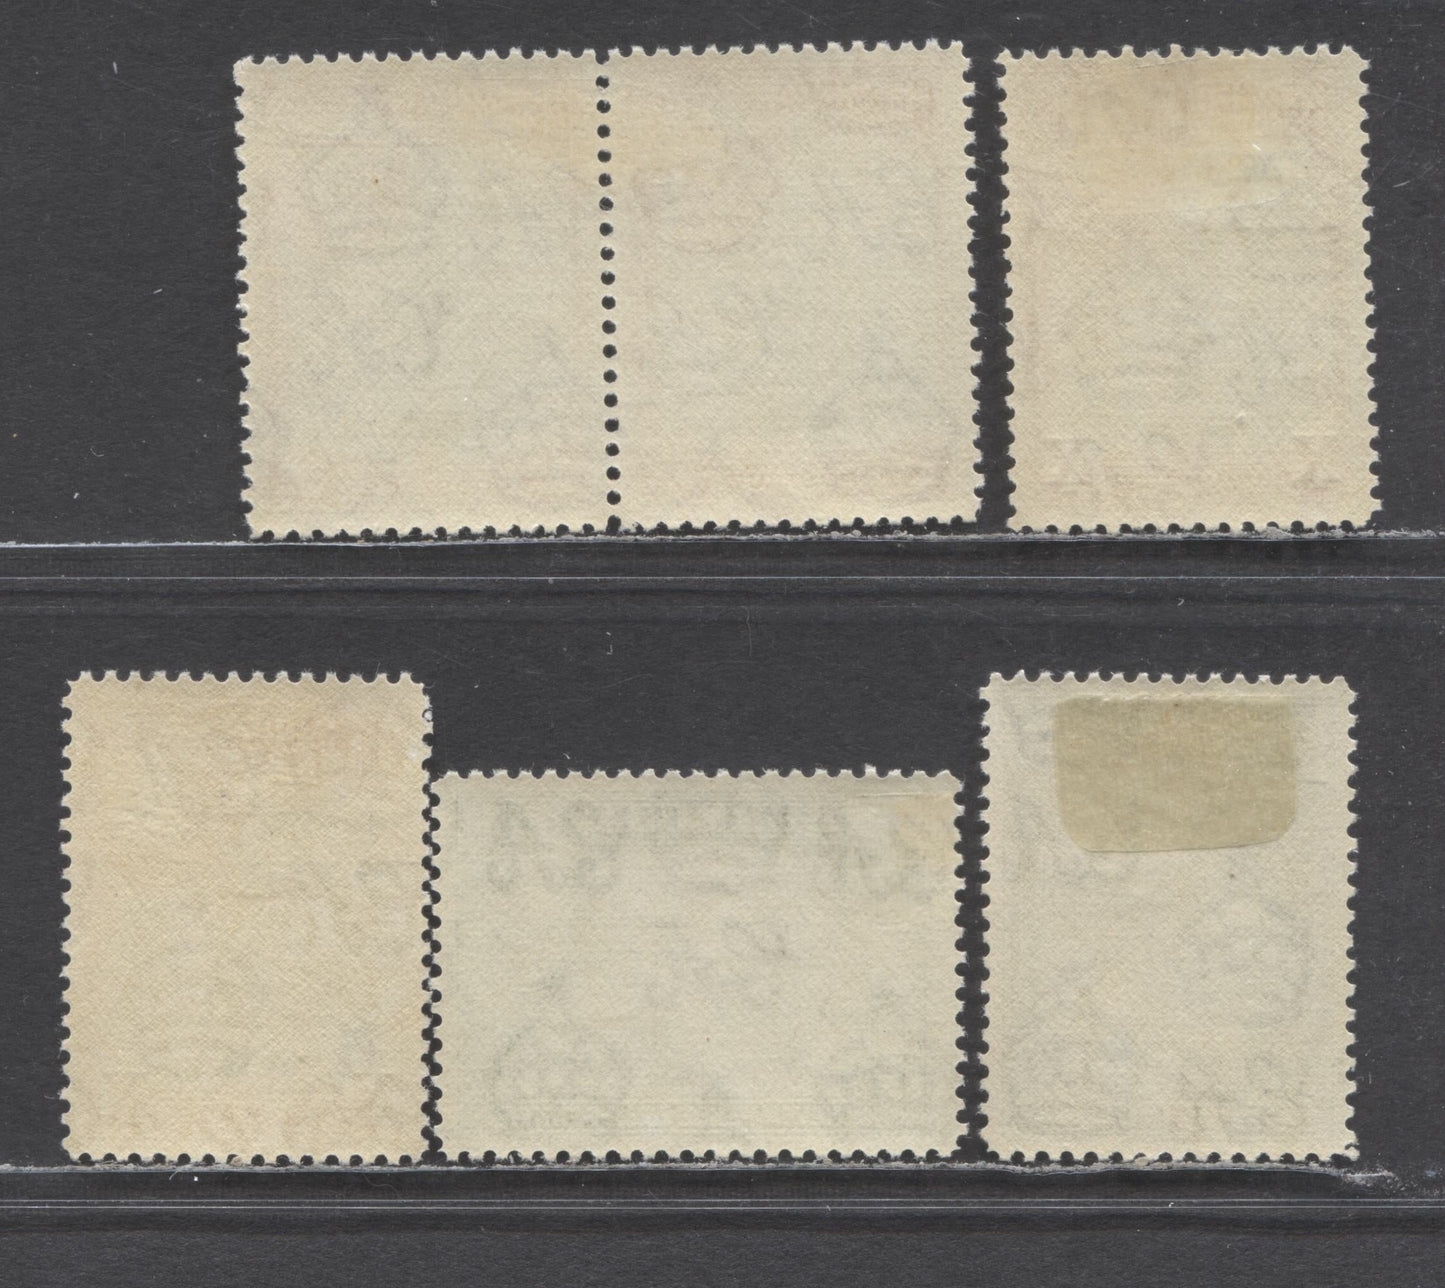 Lot 69 Bermuda SC#120/129 1938-1951 KGVI Pictorial Issue, 1/2d Surcharges With Different Spaces , 5 VFOG Singles & Pair, Click on Listing to See ALL Pictures, 2022 Scott Classic Cat. $39.7 USD